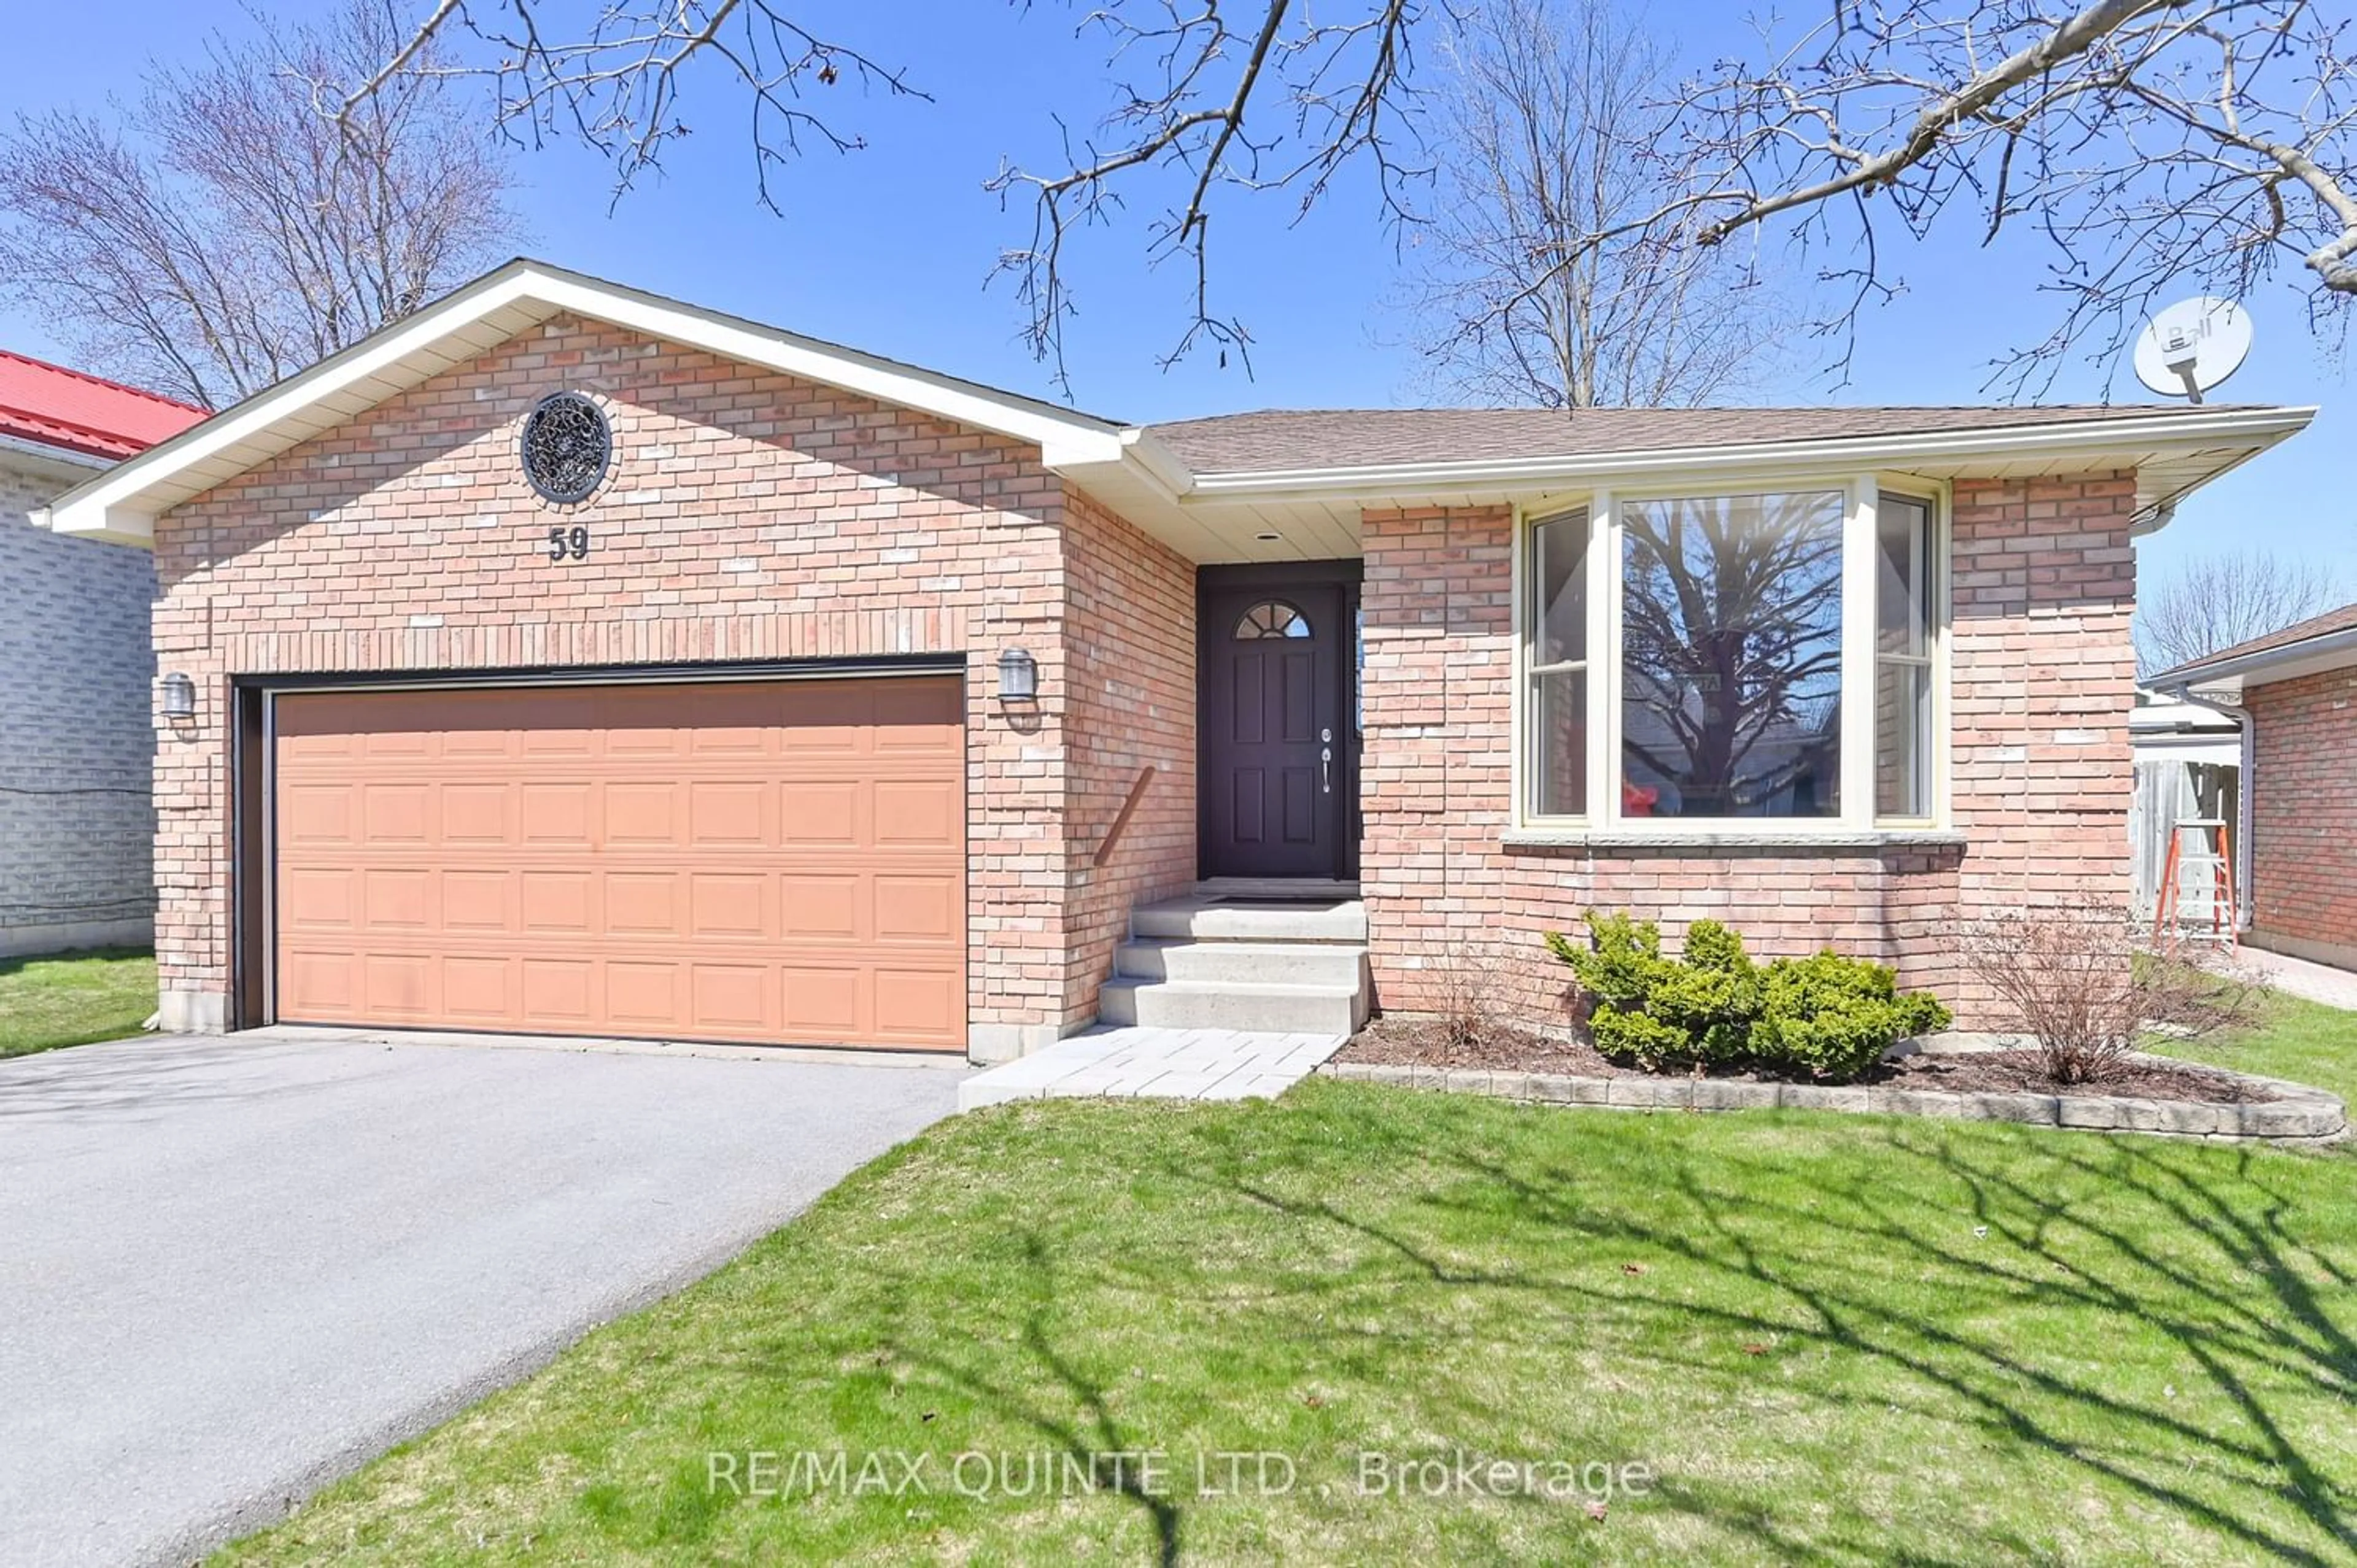 Home with brick exterior material for 59 Forchuk Cres, Quinte West Ontario K8V 6N2